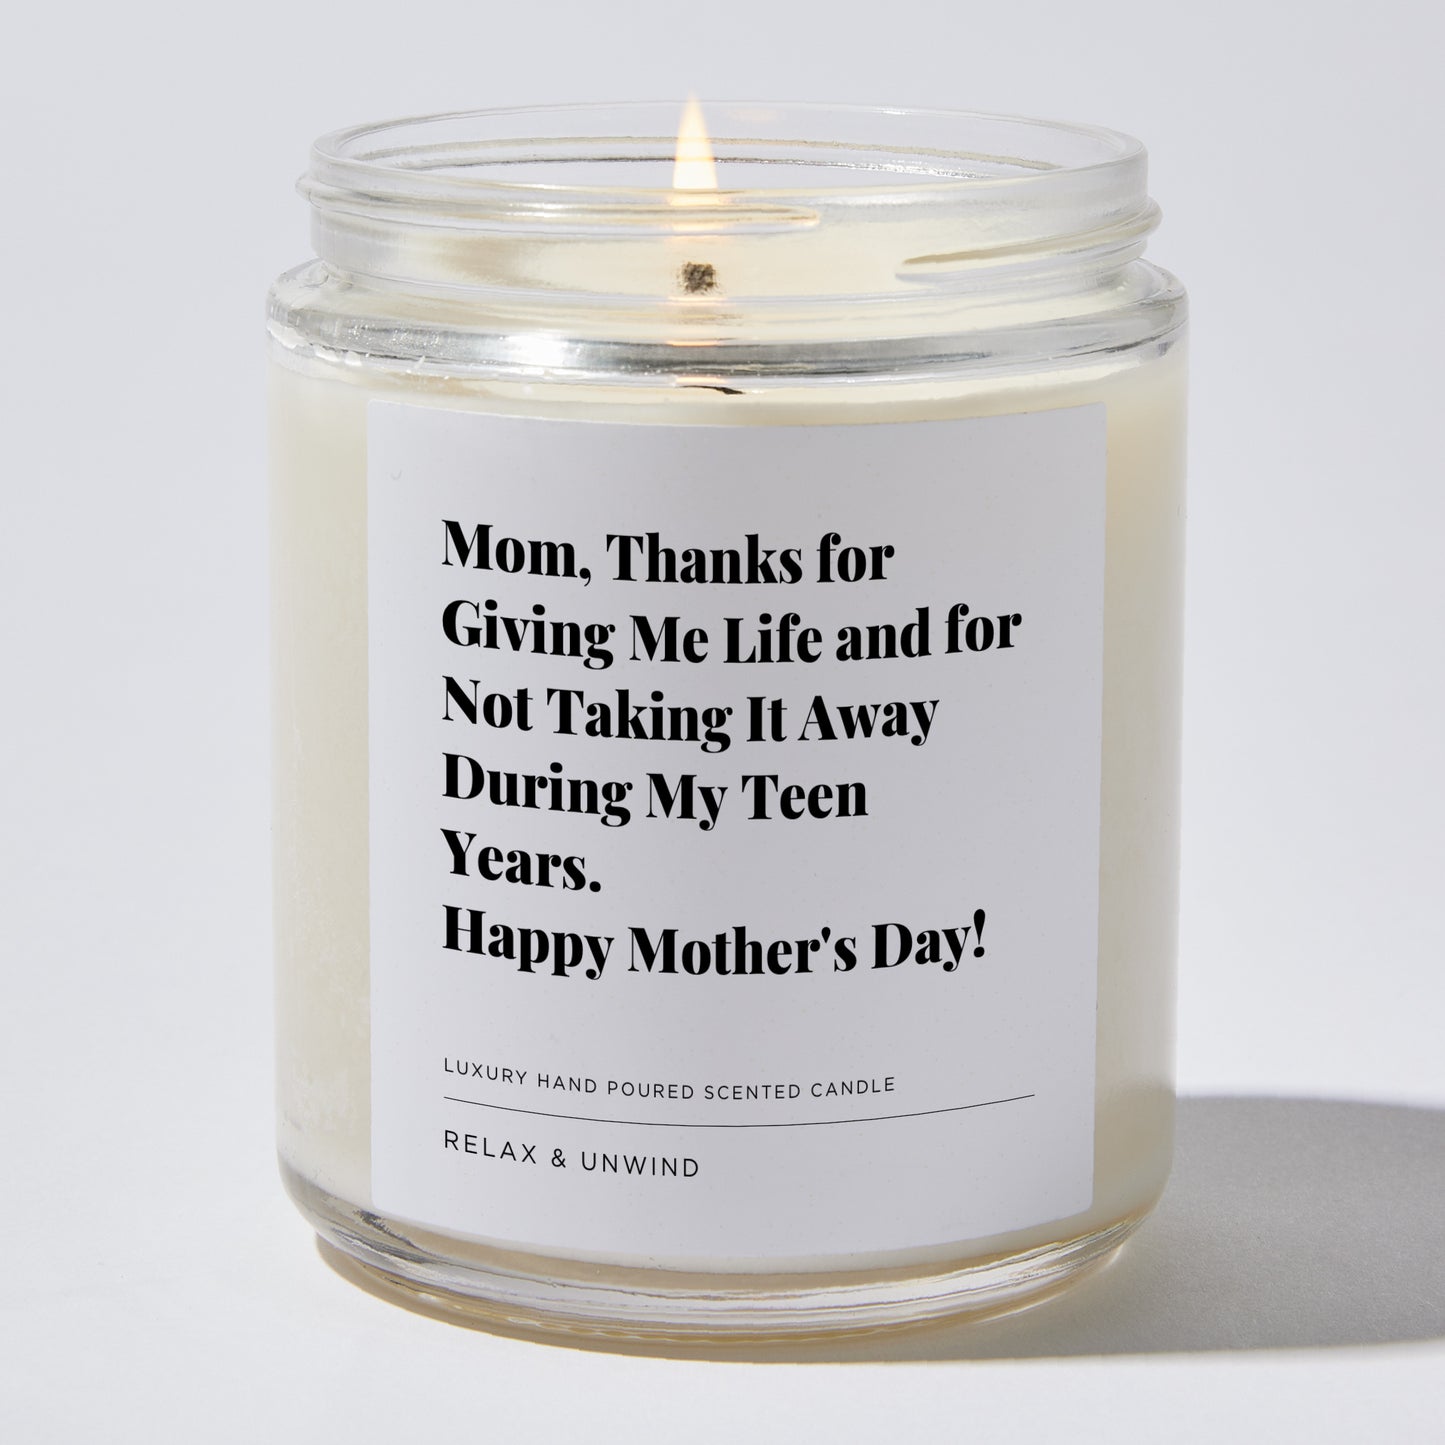 Gift for Mom - Mom, Thanks for giving me life and for not taking it away during my teen years. Happy Mother's Day! - Candle